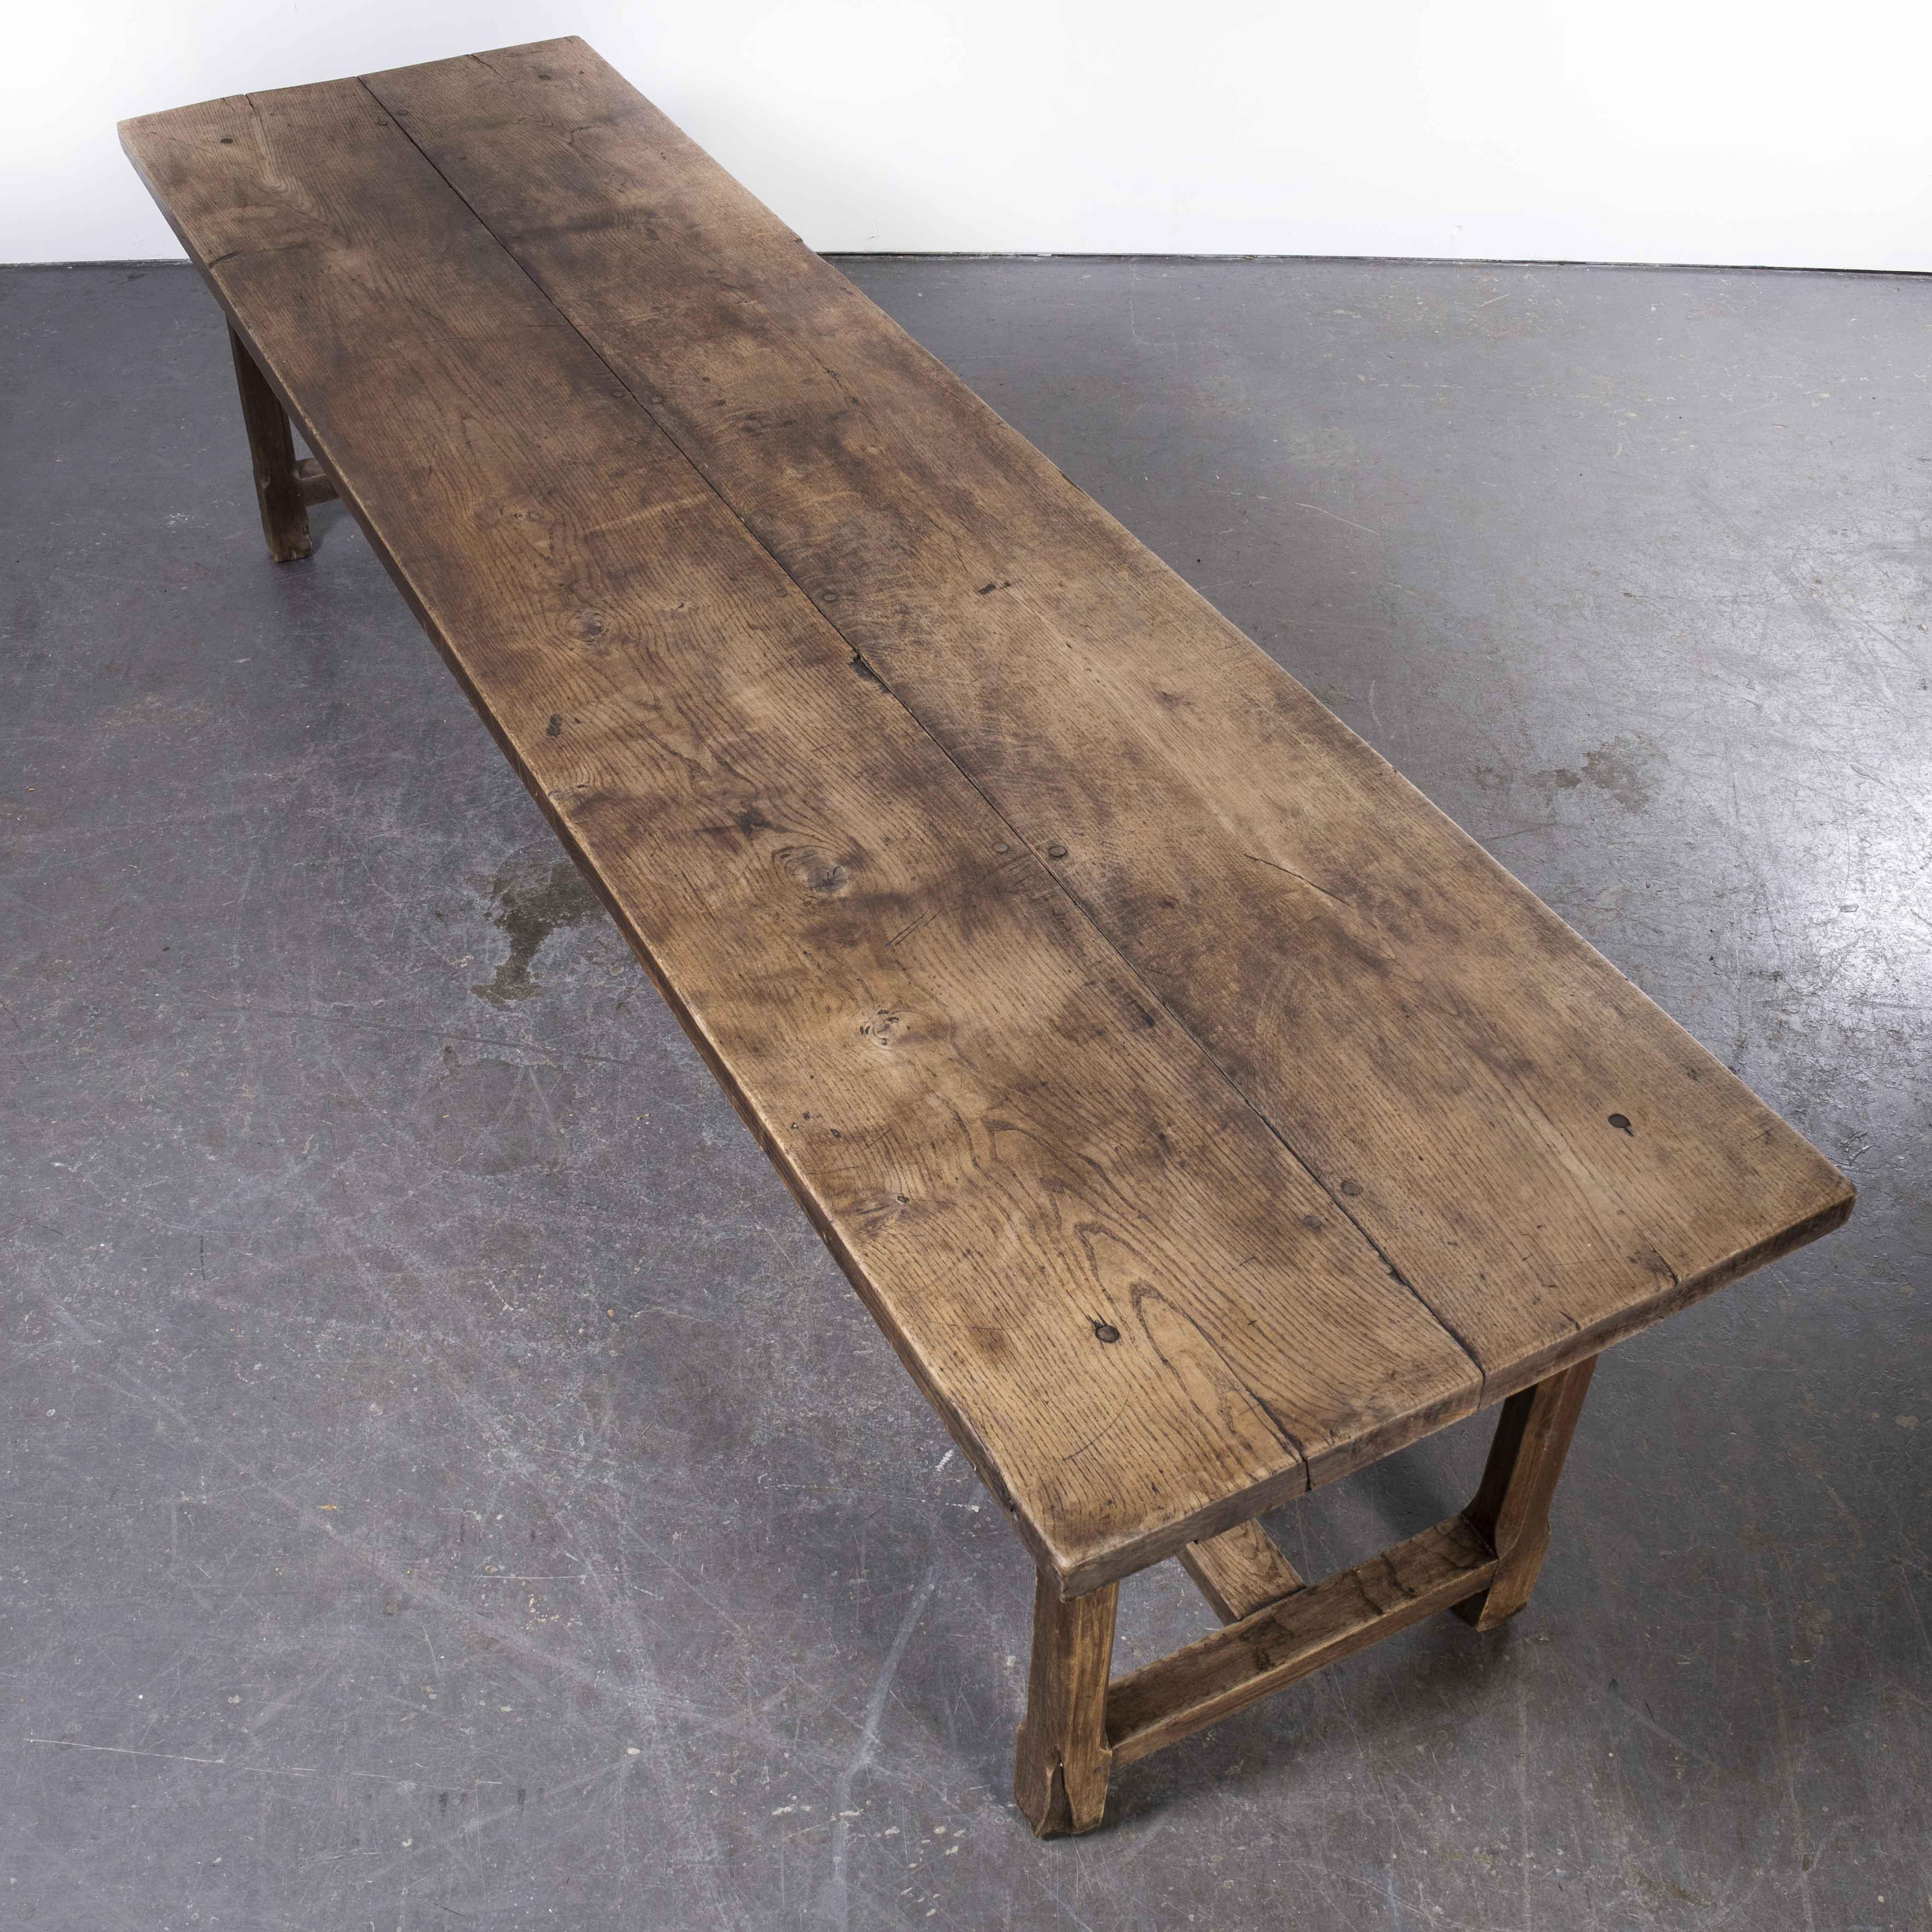 19th century solid oak large French Chateau dining table
19th century solid oak large French Chateau dining table. One of the best (and heaviest) tables we have stocked. At 3.2 metres long this is a very large and totally originally table. Handmade